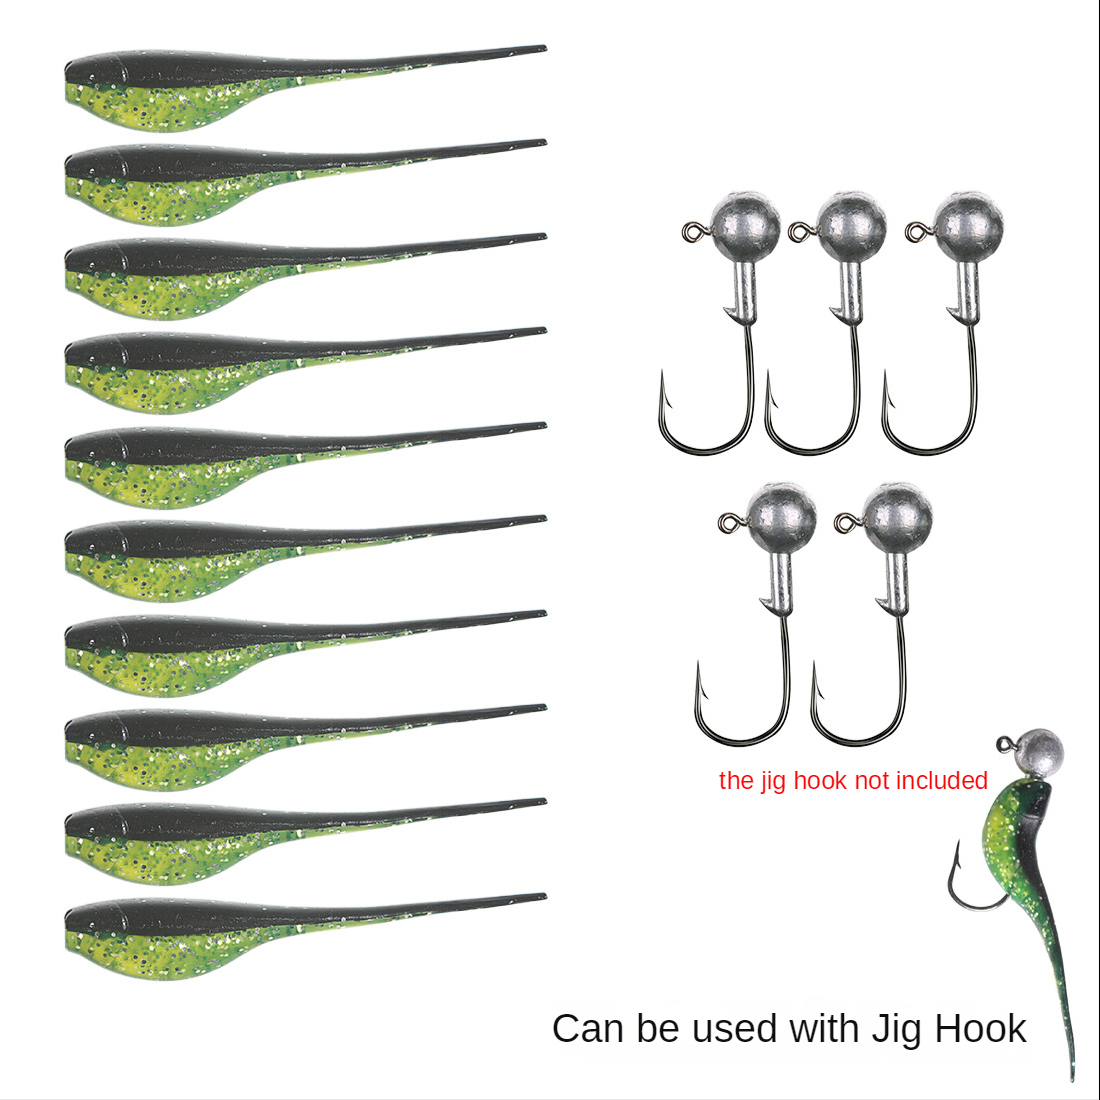  VINGVO Fishing Lure Kit Precise Design Shaped Soft Single Hook  Fishing Lures for Freshwter to Cast Fishing Rod : Sports & Outdoors